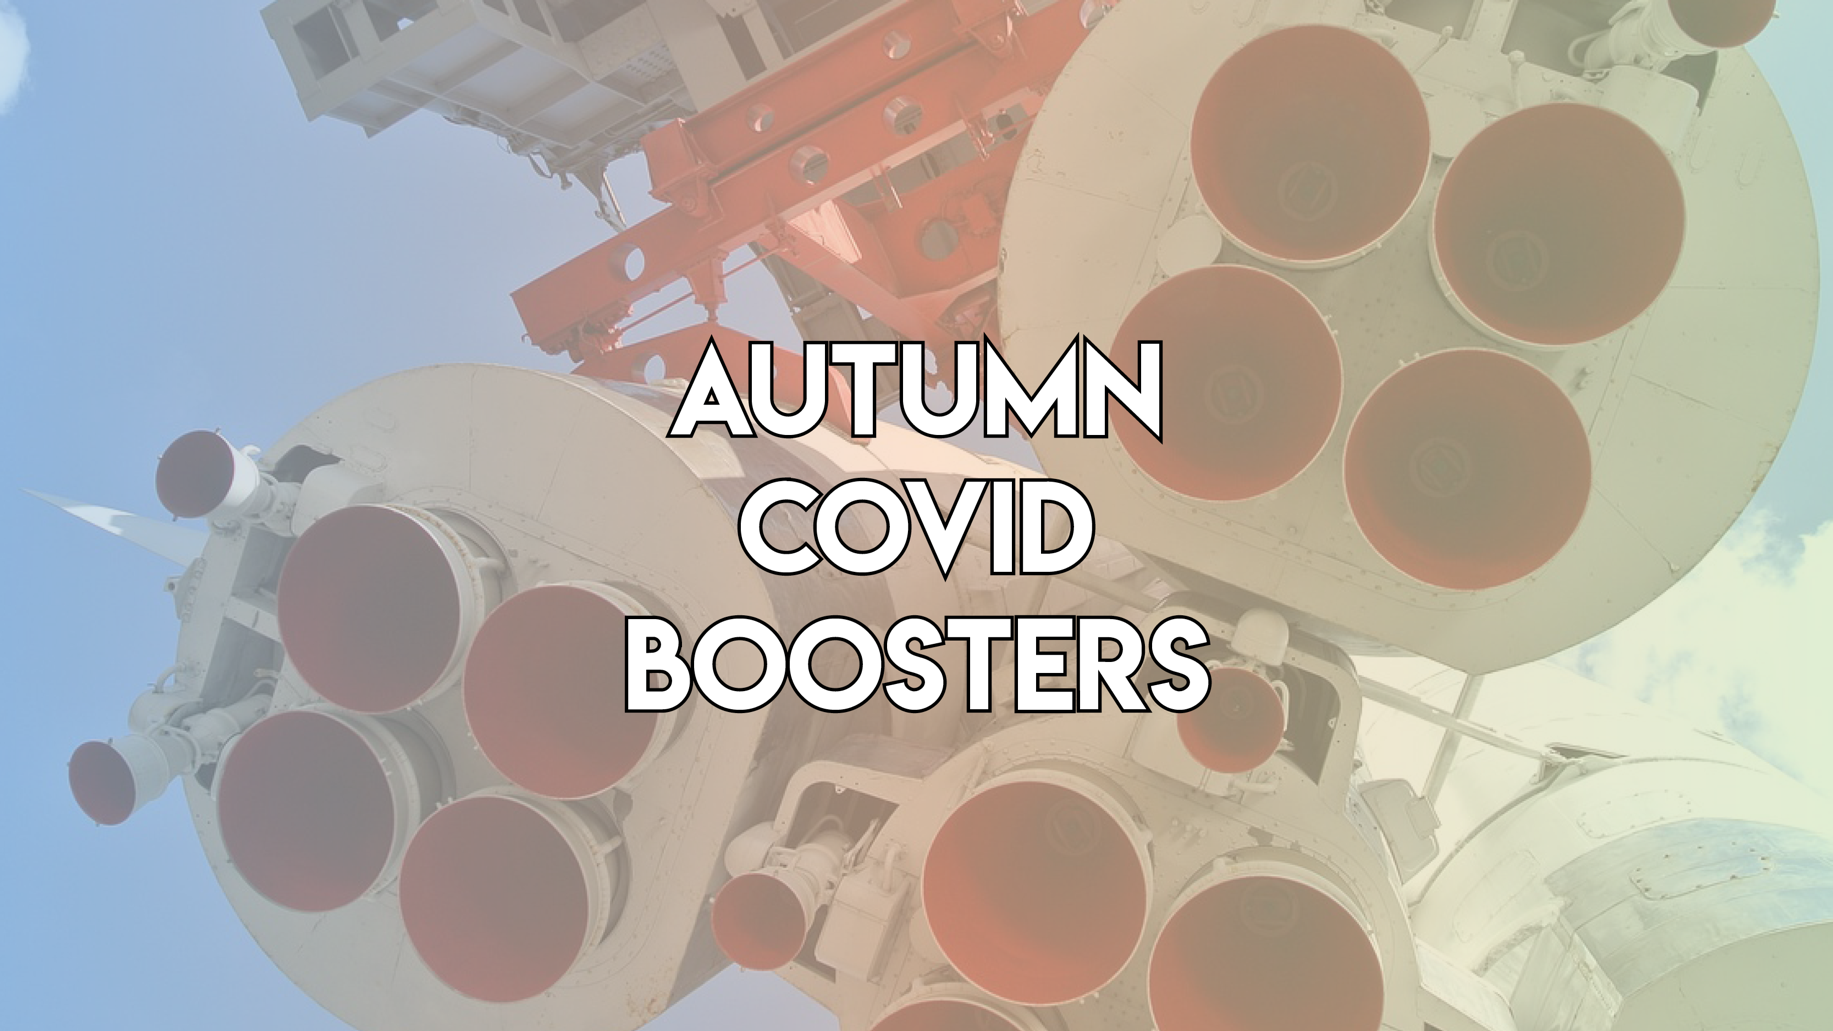 Covid Boosters for those most at risk this Autumn